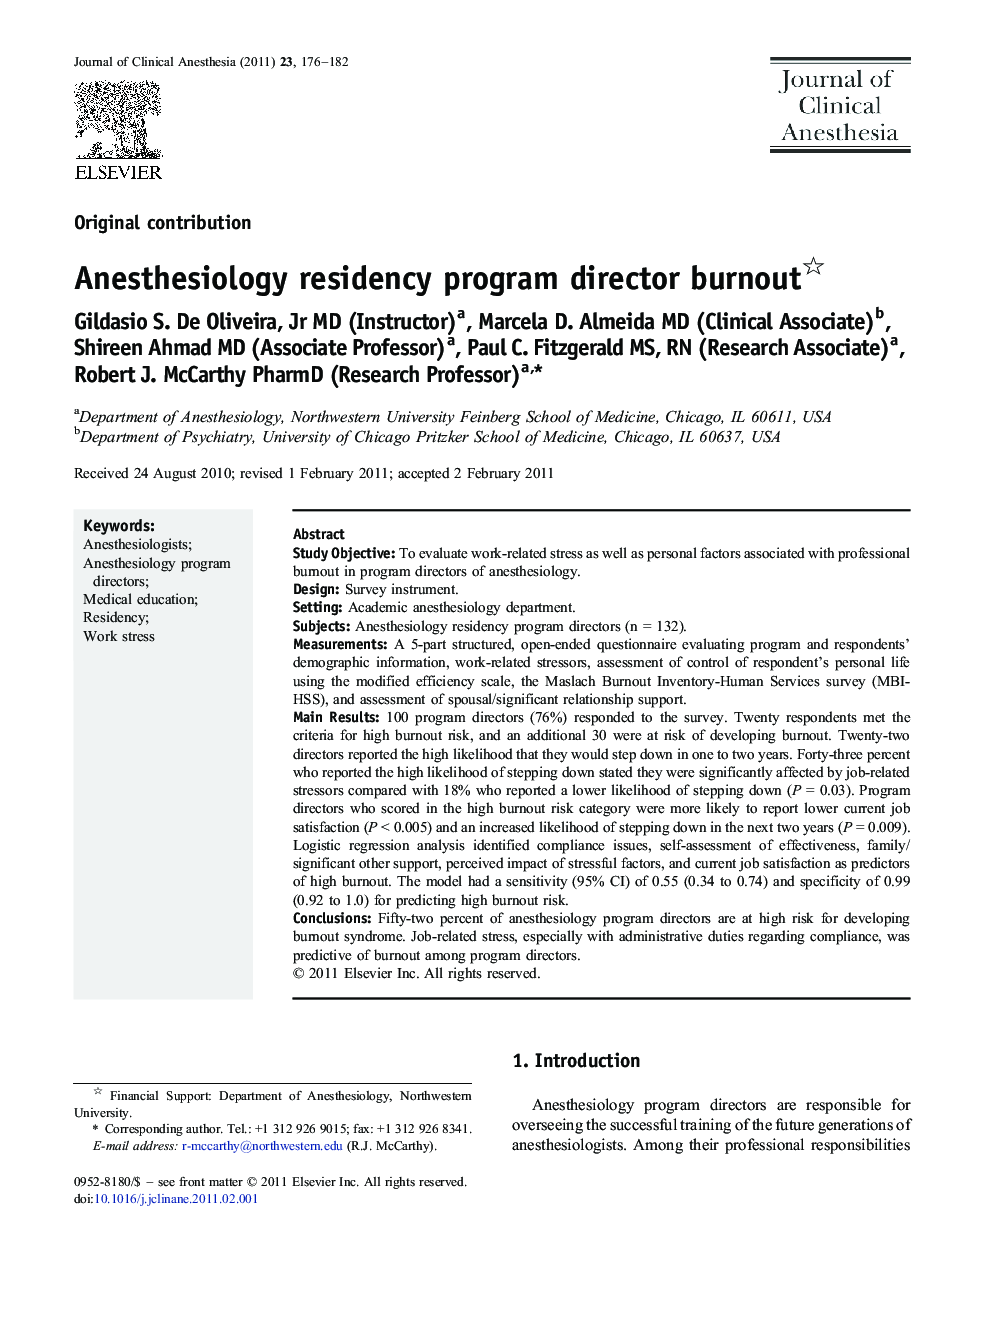 Anesthesiology residency program director burnout 